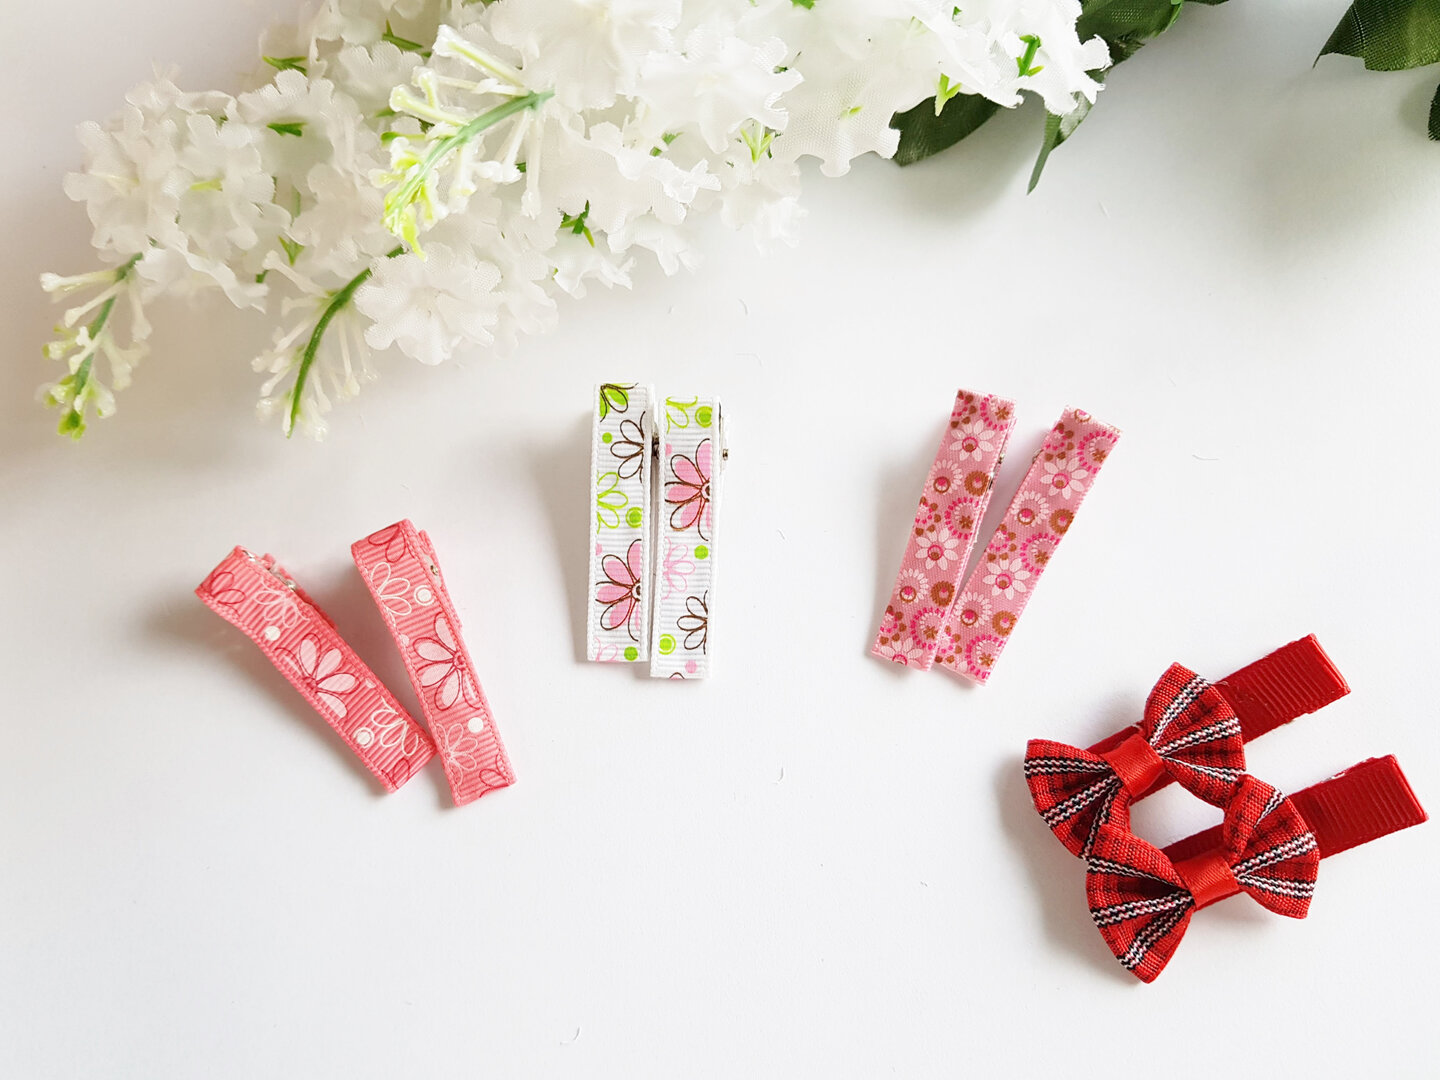 Check out our Pretty Hair Clips at the Kids Accessories section